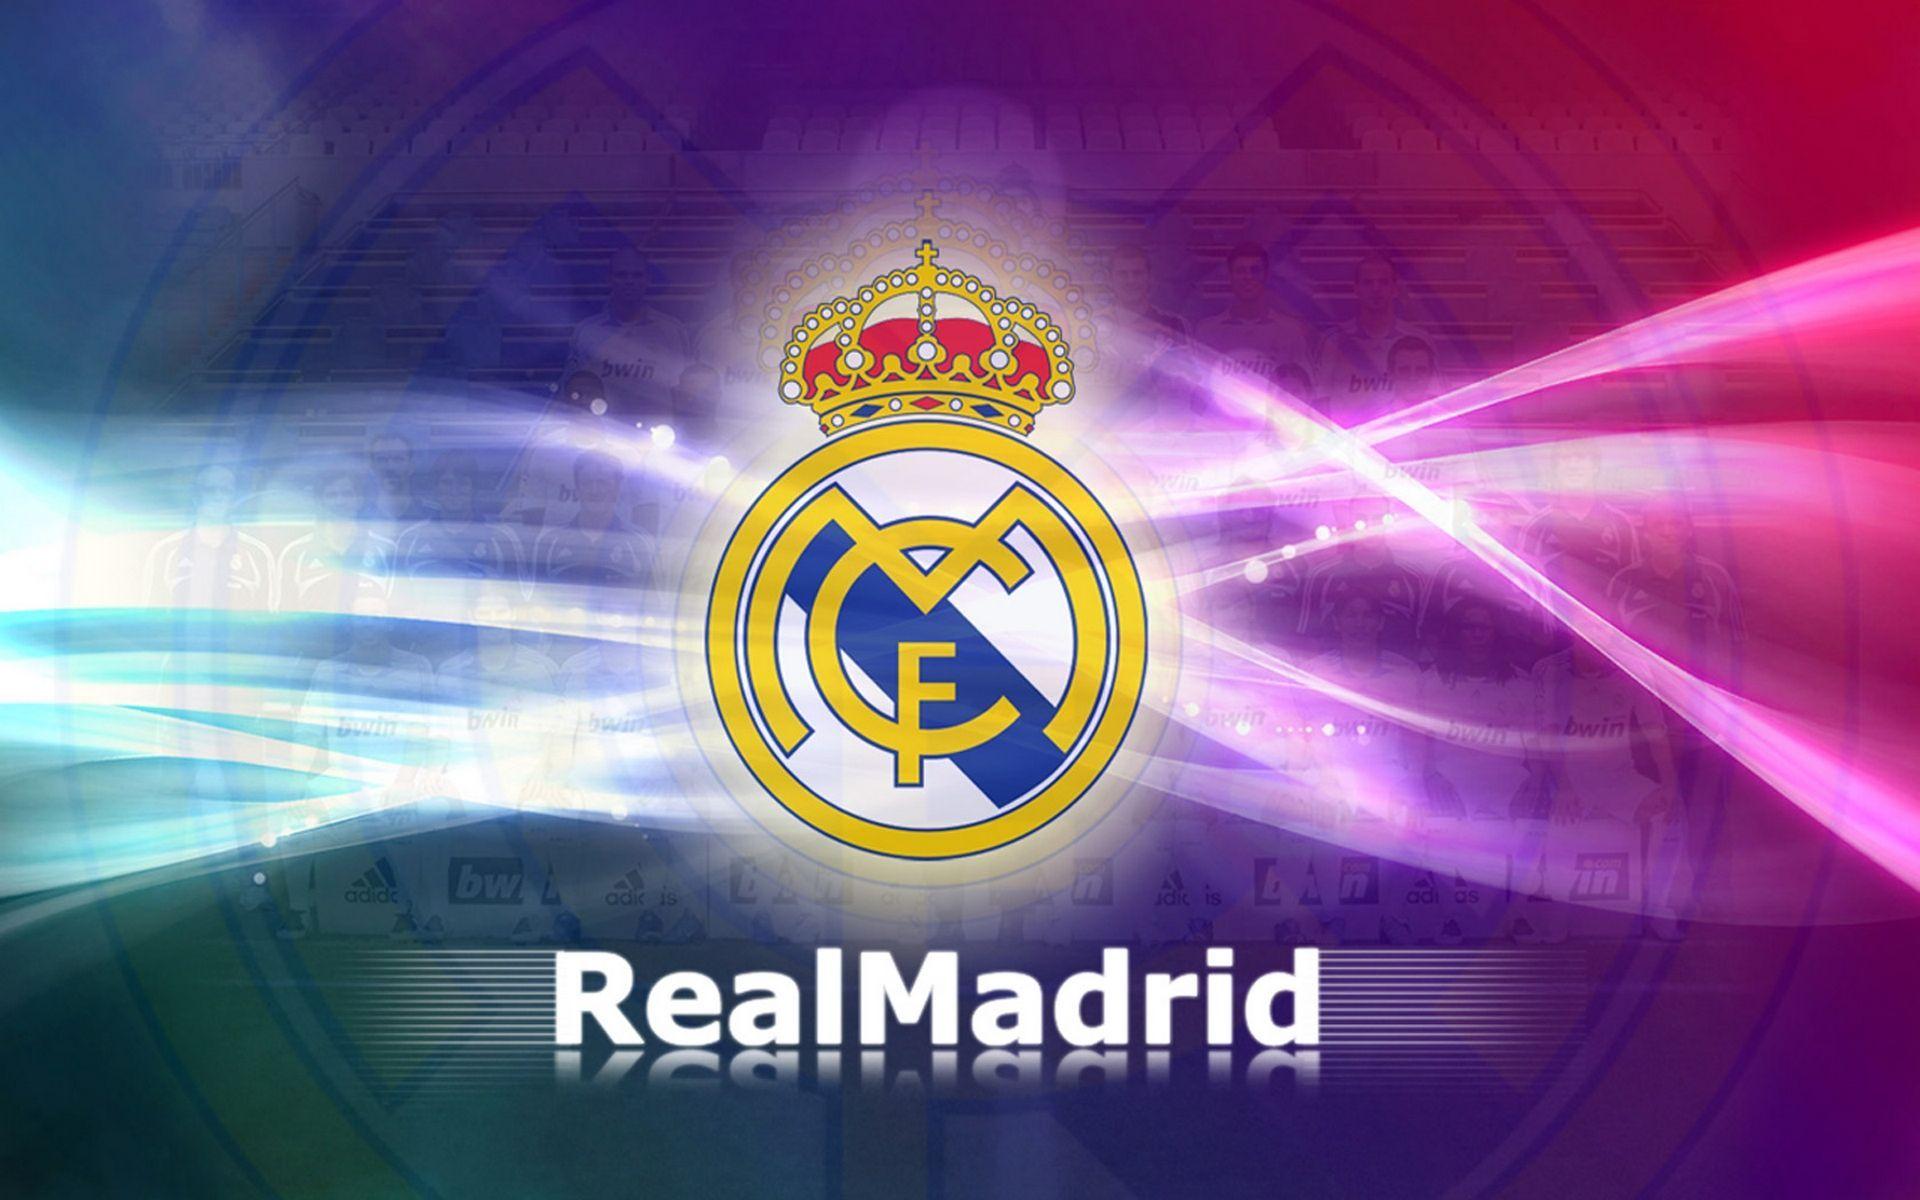 Real Madrid 2020 Wallpapers - Top Free Real Madrid 2020 ...